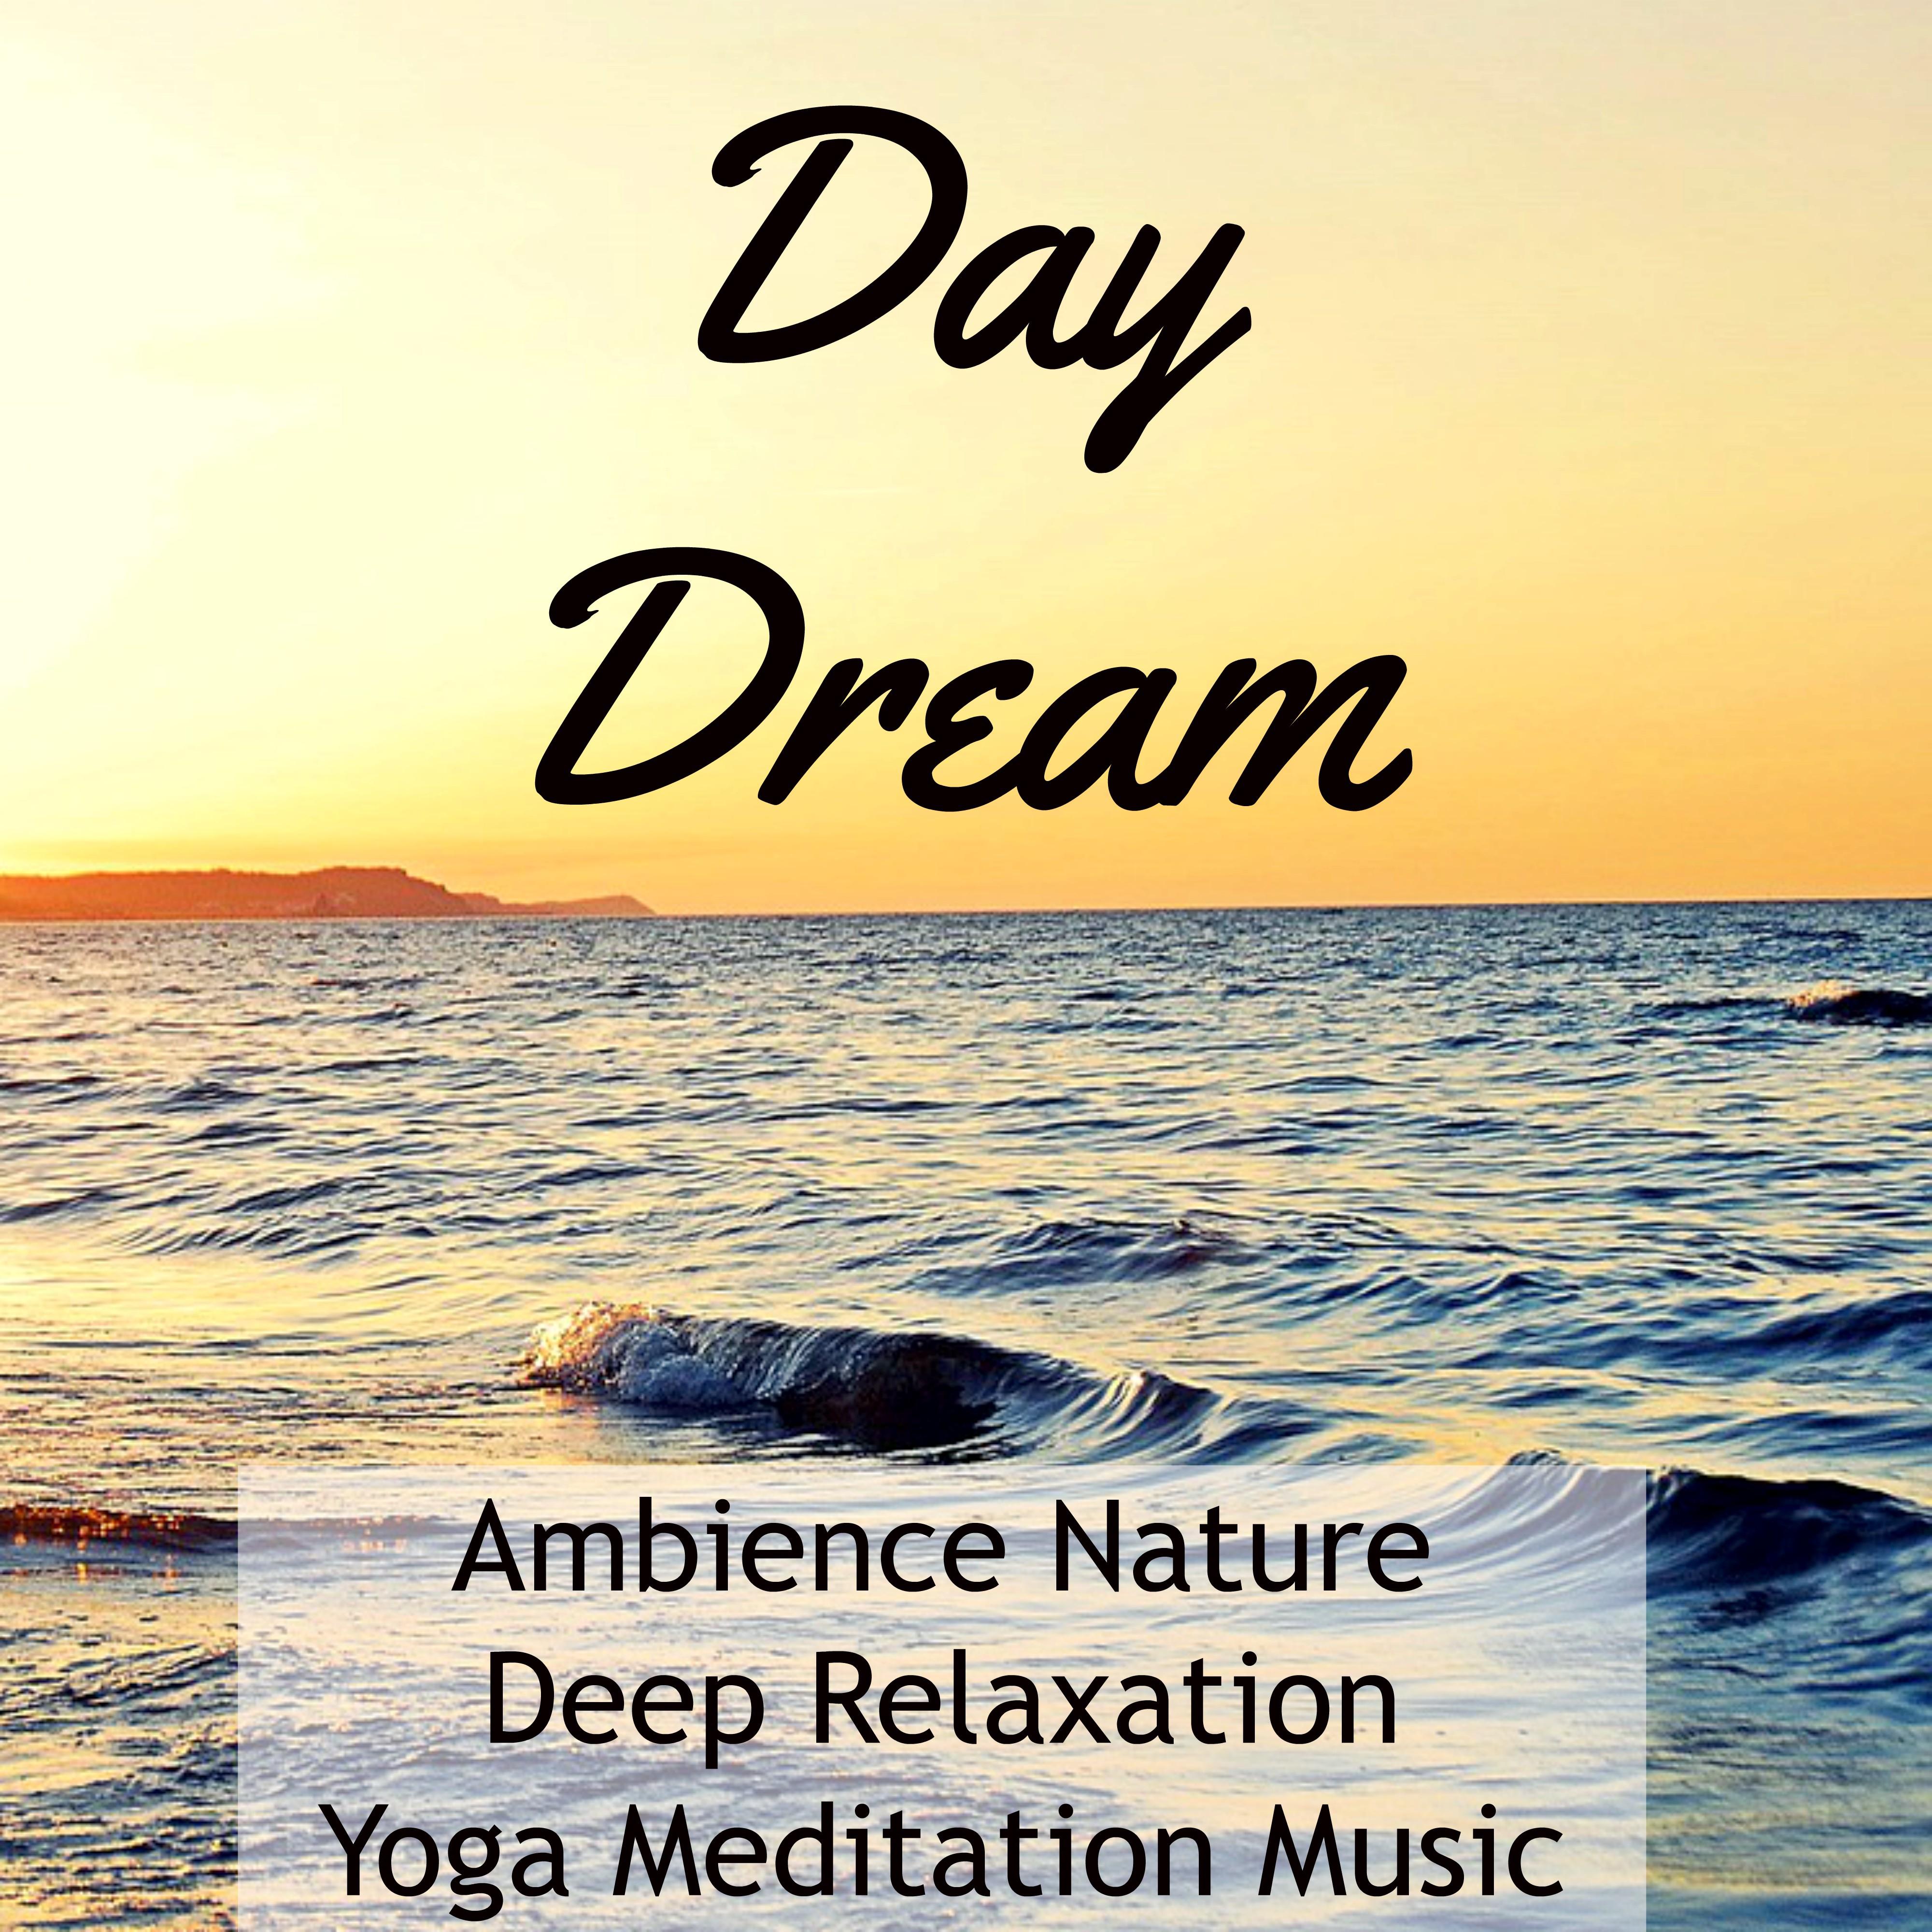 Day Dream - Ambience Nature Deep Relaxation Yoga Meditation Music with Spiritual Soothing New Age Sounds